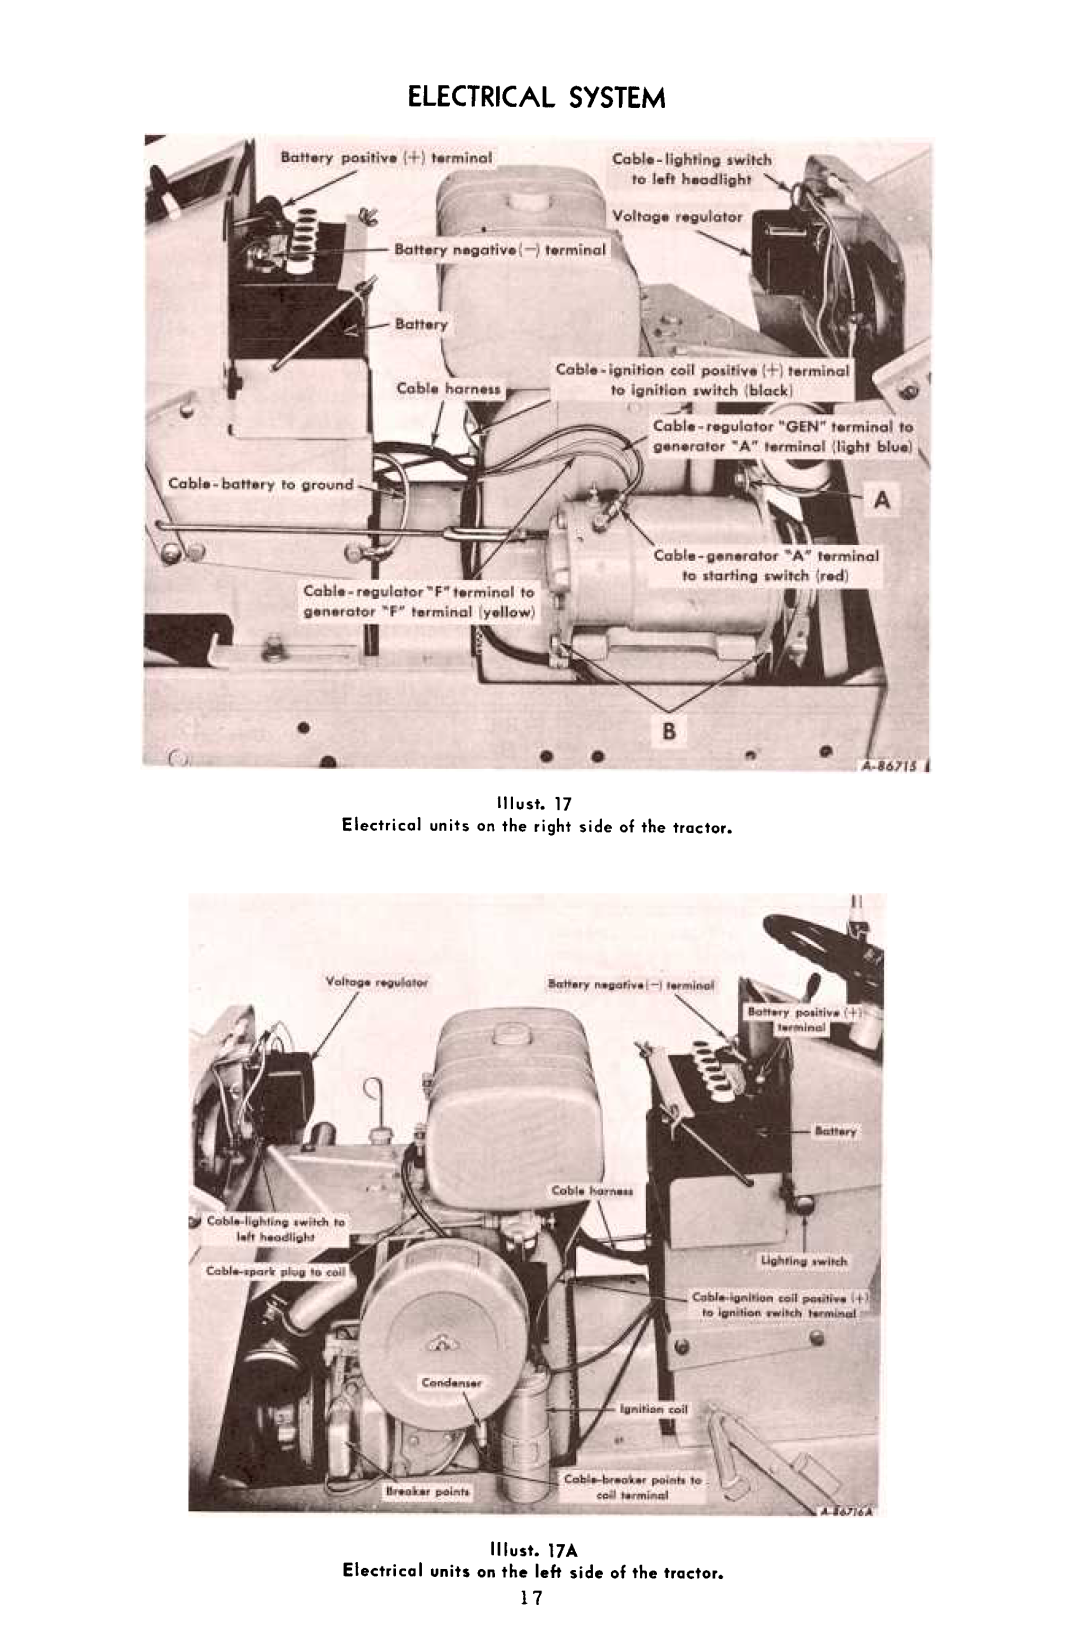 Cub Cadet 71 manual Electricalsystem, Illust.17A Electrical units on the left side of the tractor 